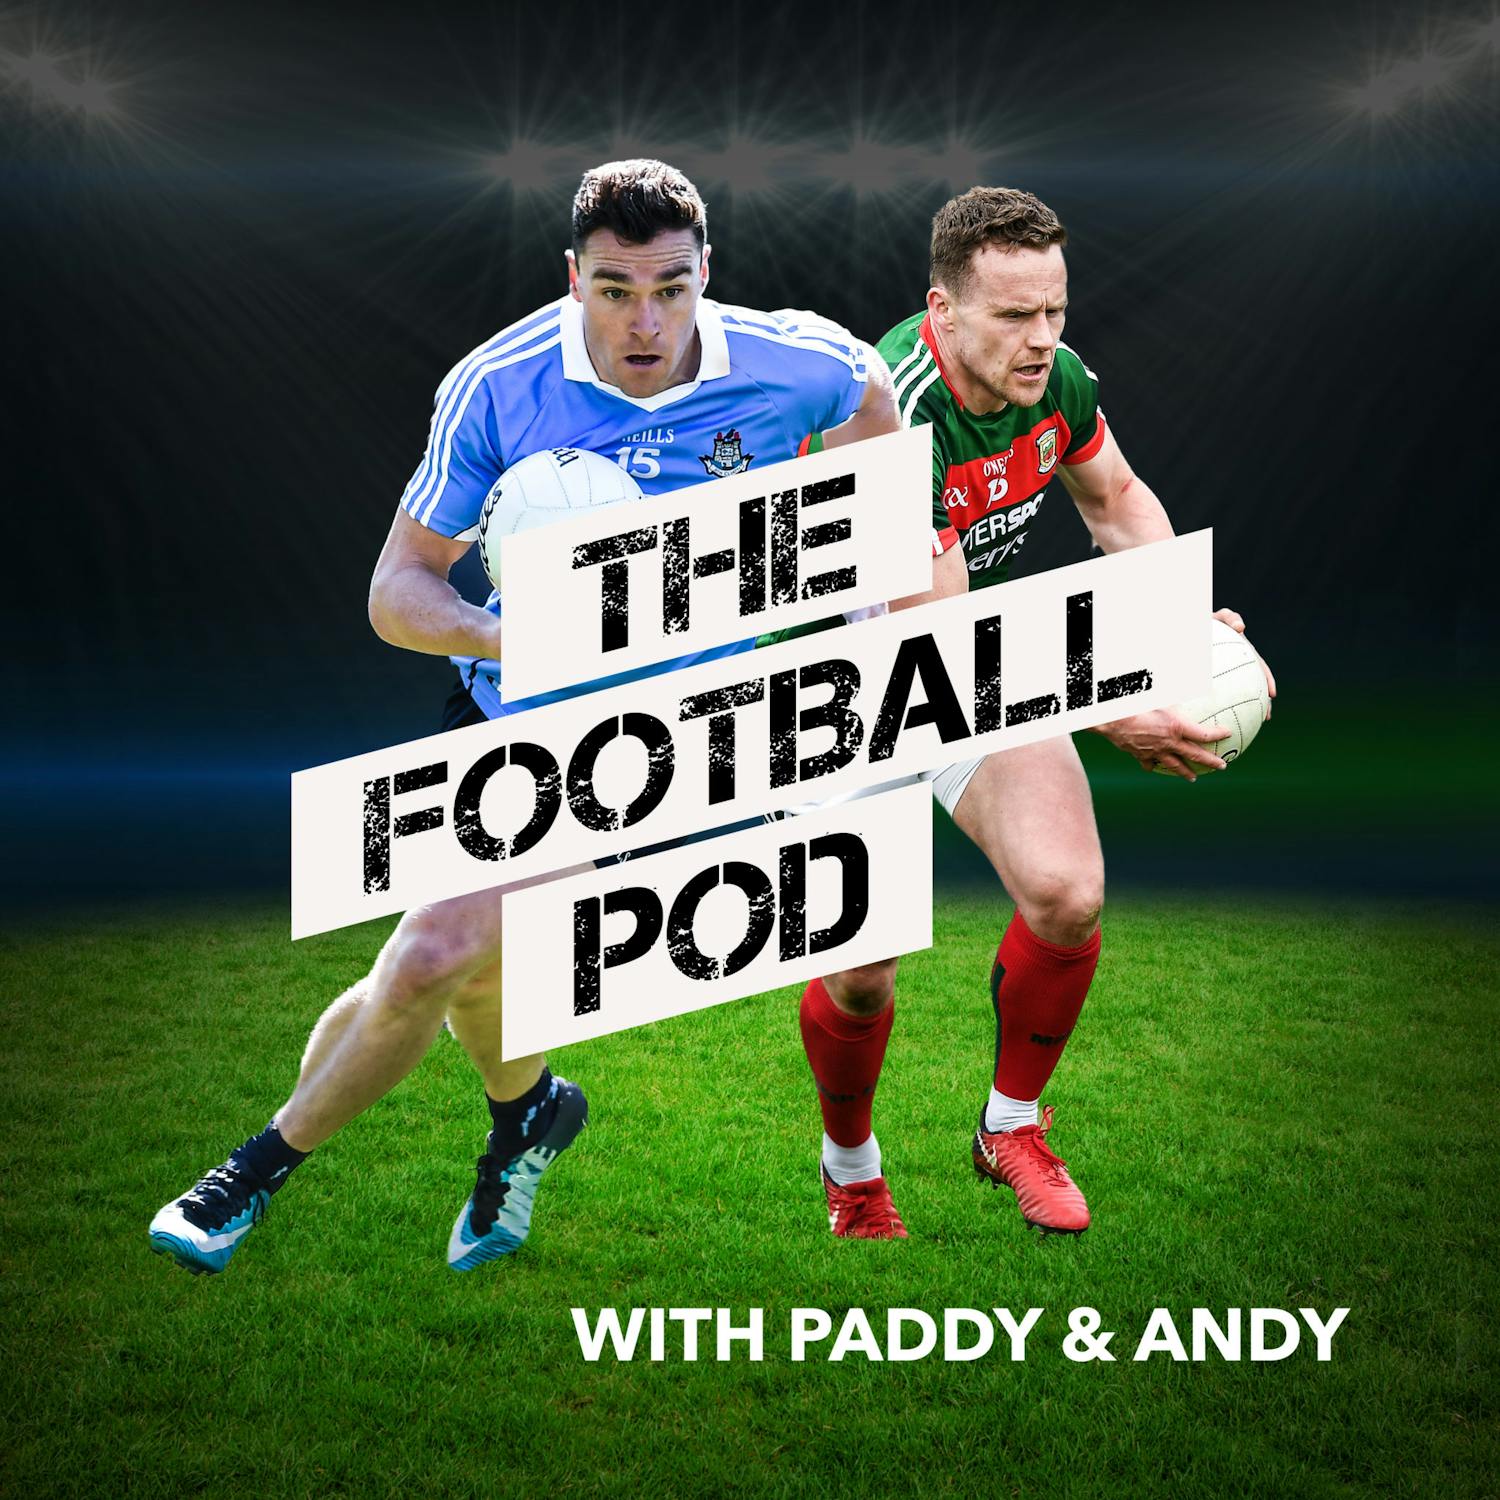 The Football Pod Ep.2 - why Clifford excelled, matching Dublin, hope up North and Paddy’s penalty